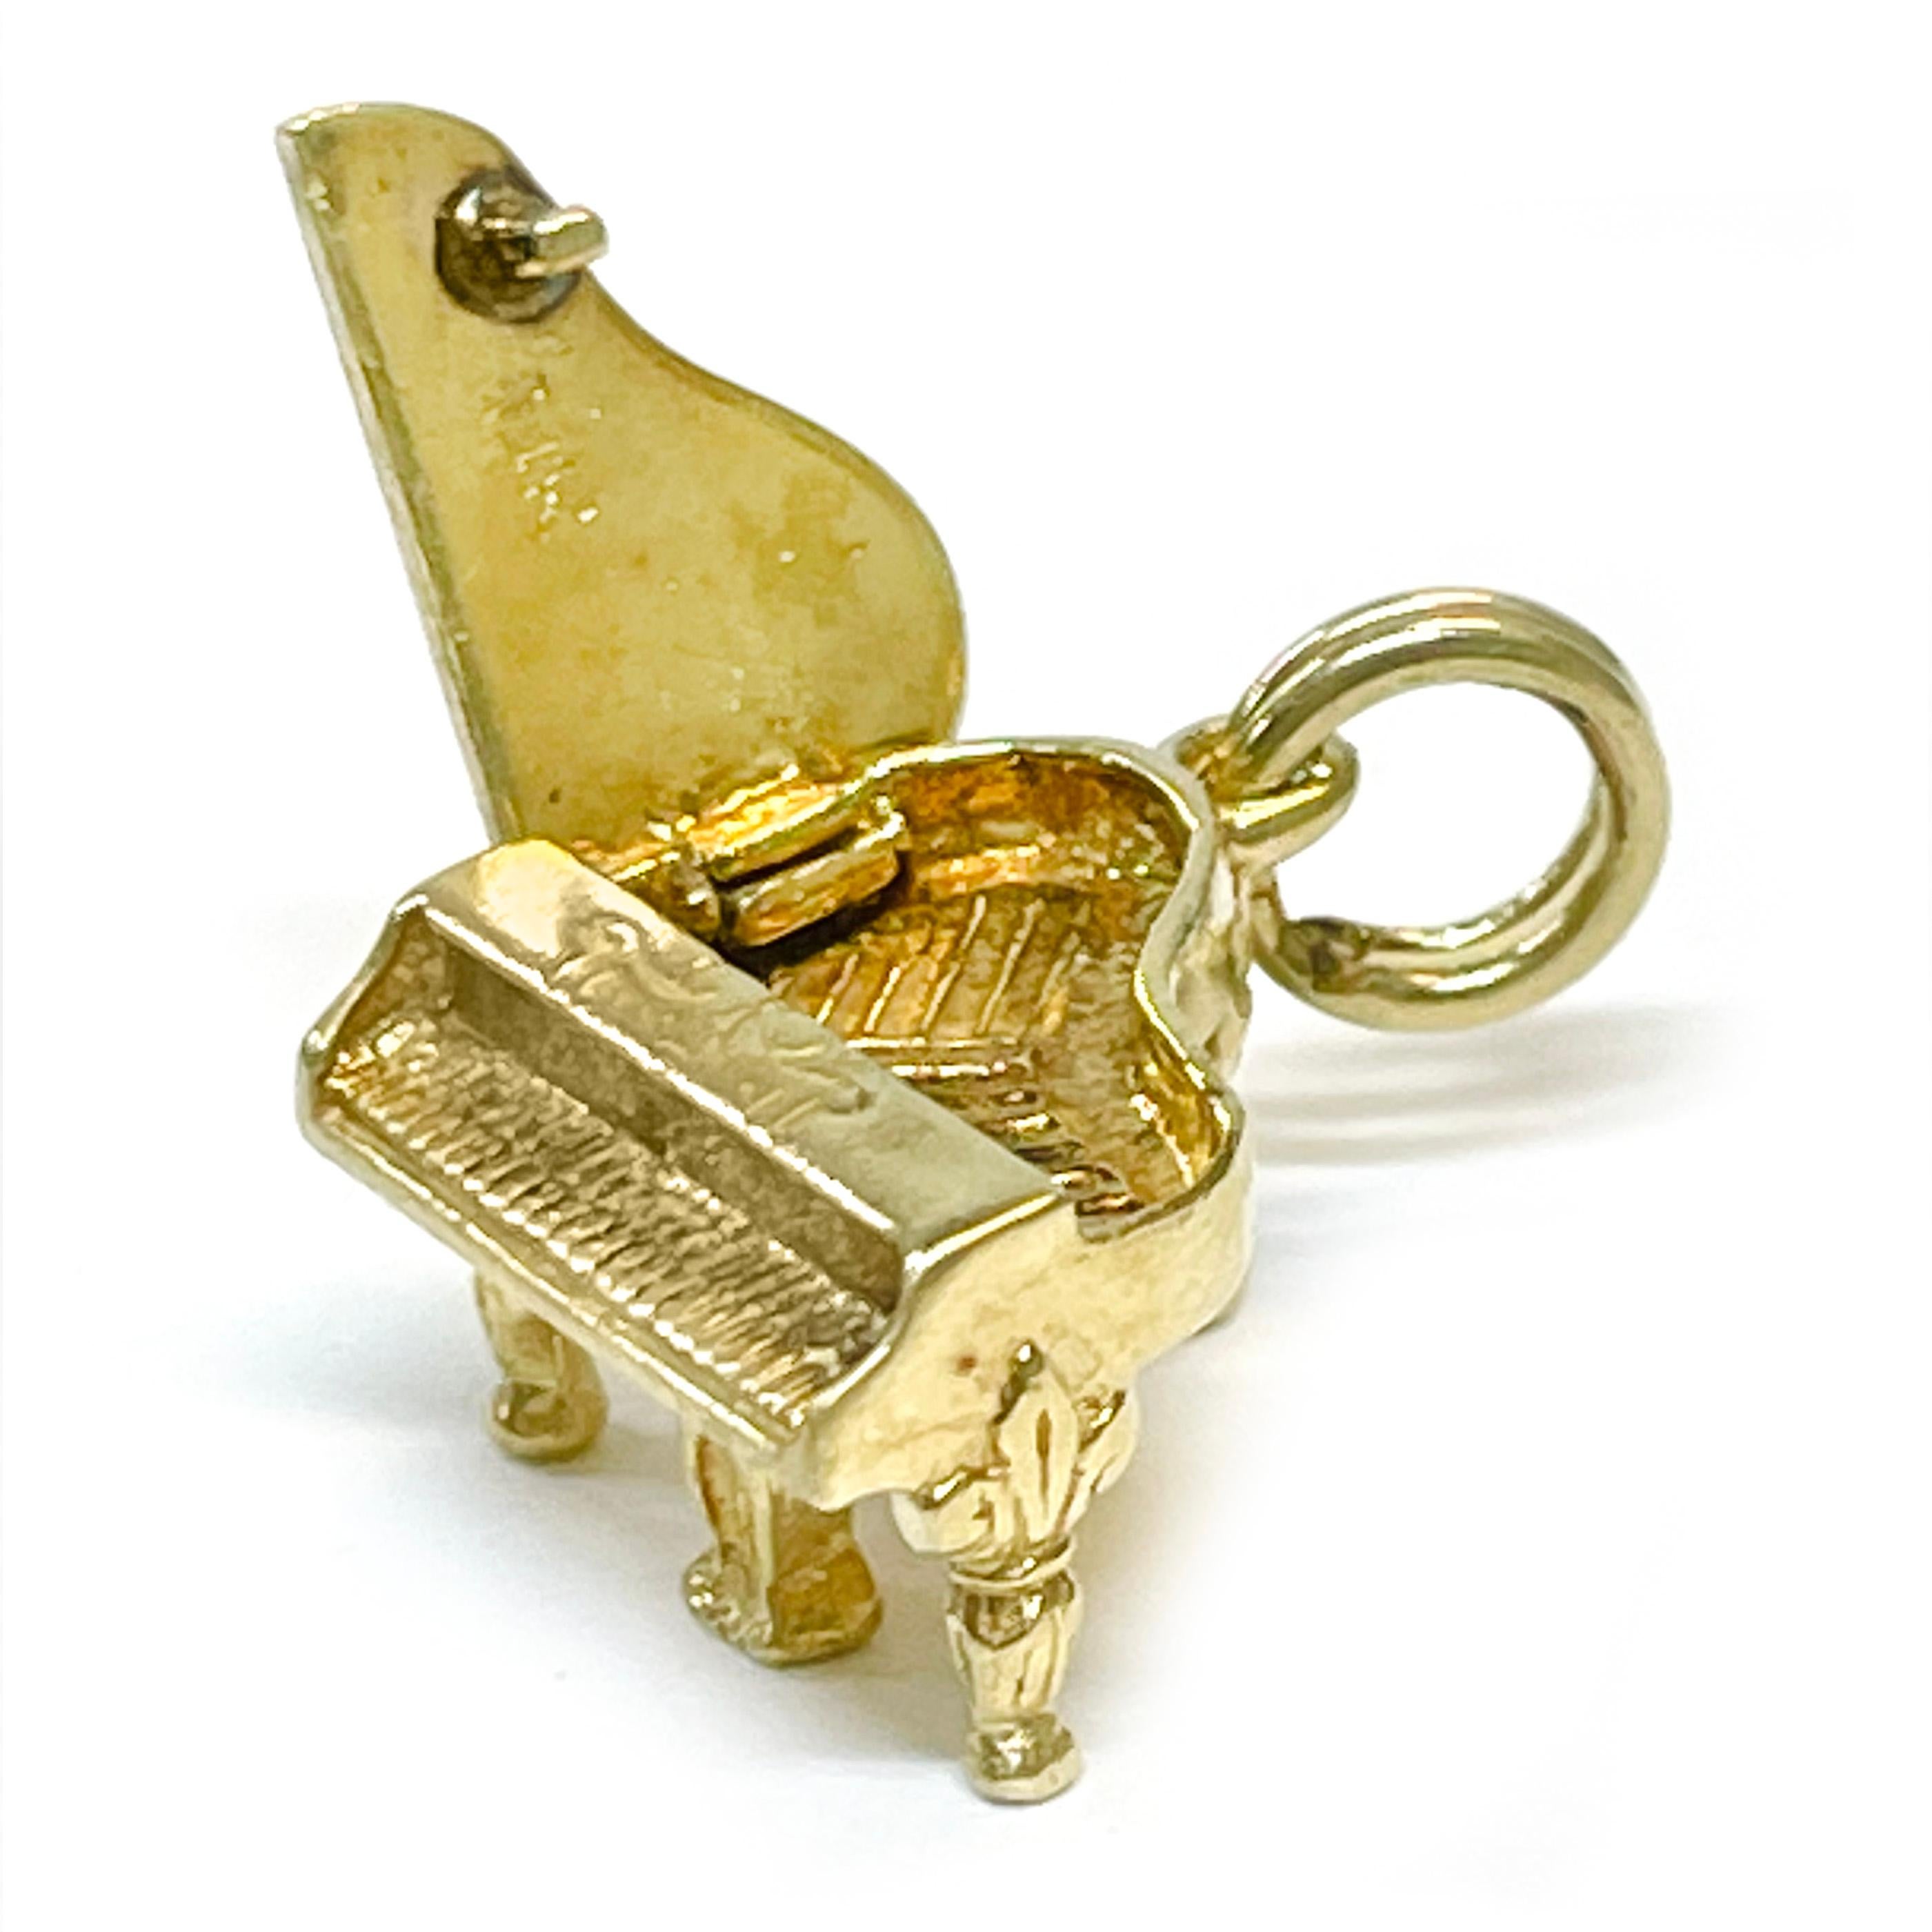 14 Karat Yellow Gold Piano Charm Pendant. This adorable piano features lovely details with fleur de lis designs on the legs, defined keys and a top that opens to show the inside of the piano. The pendant measures 9.2mm high x 12.8mm wide x 12.8mm